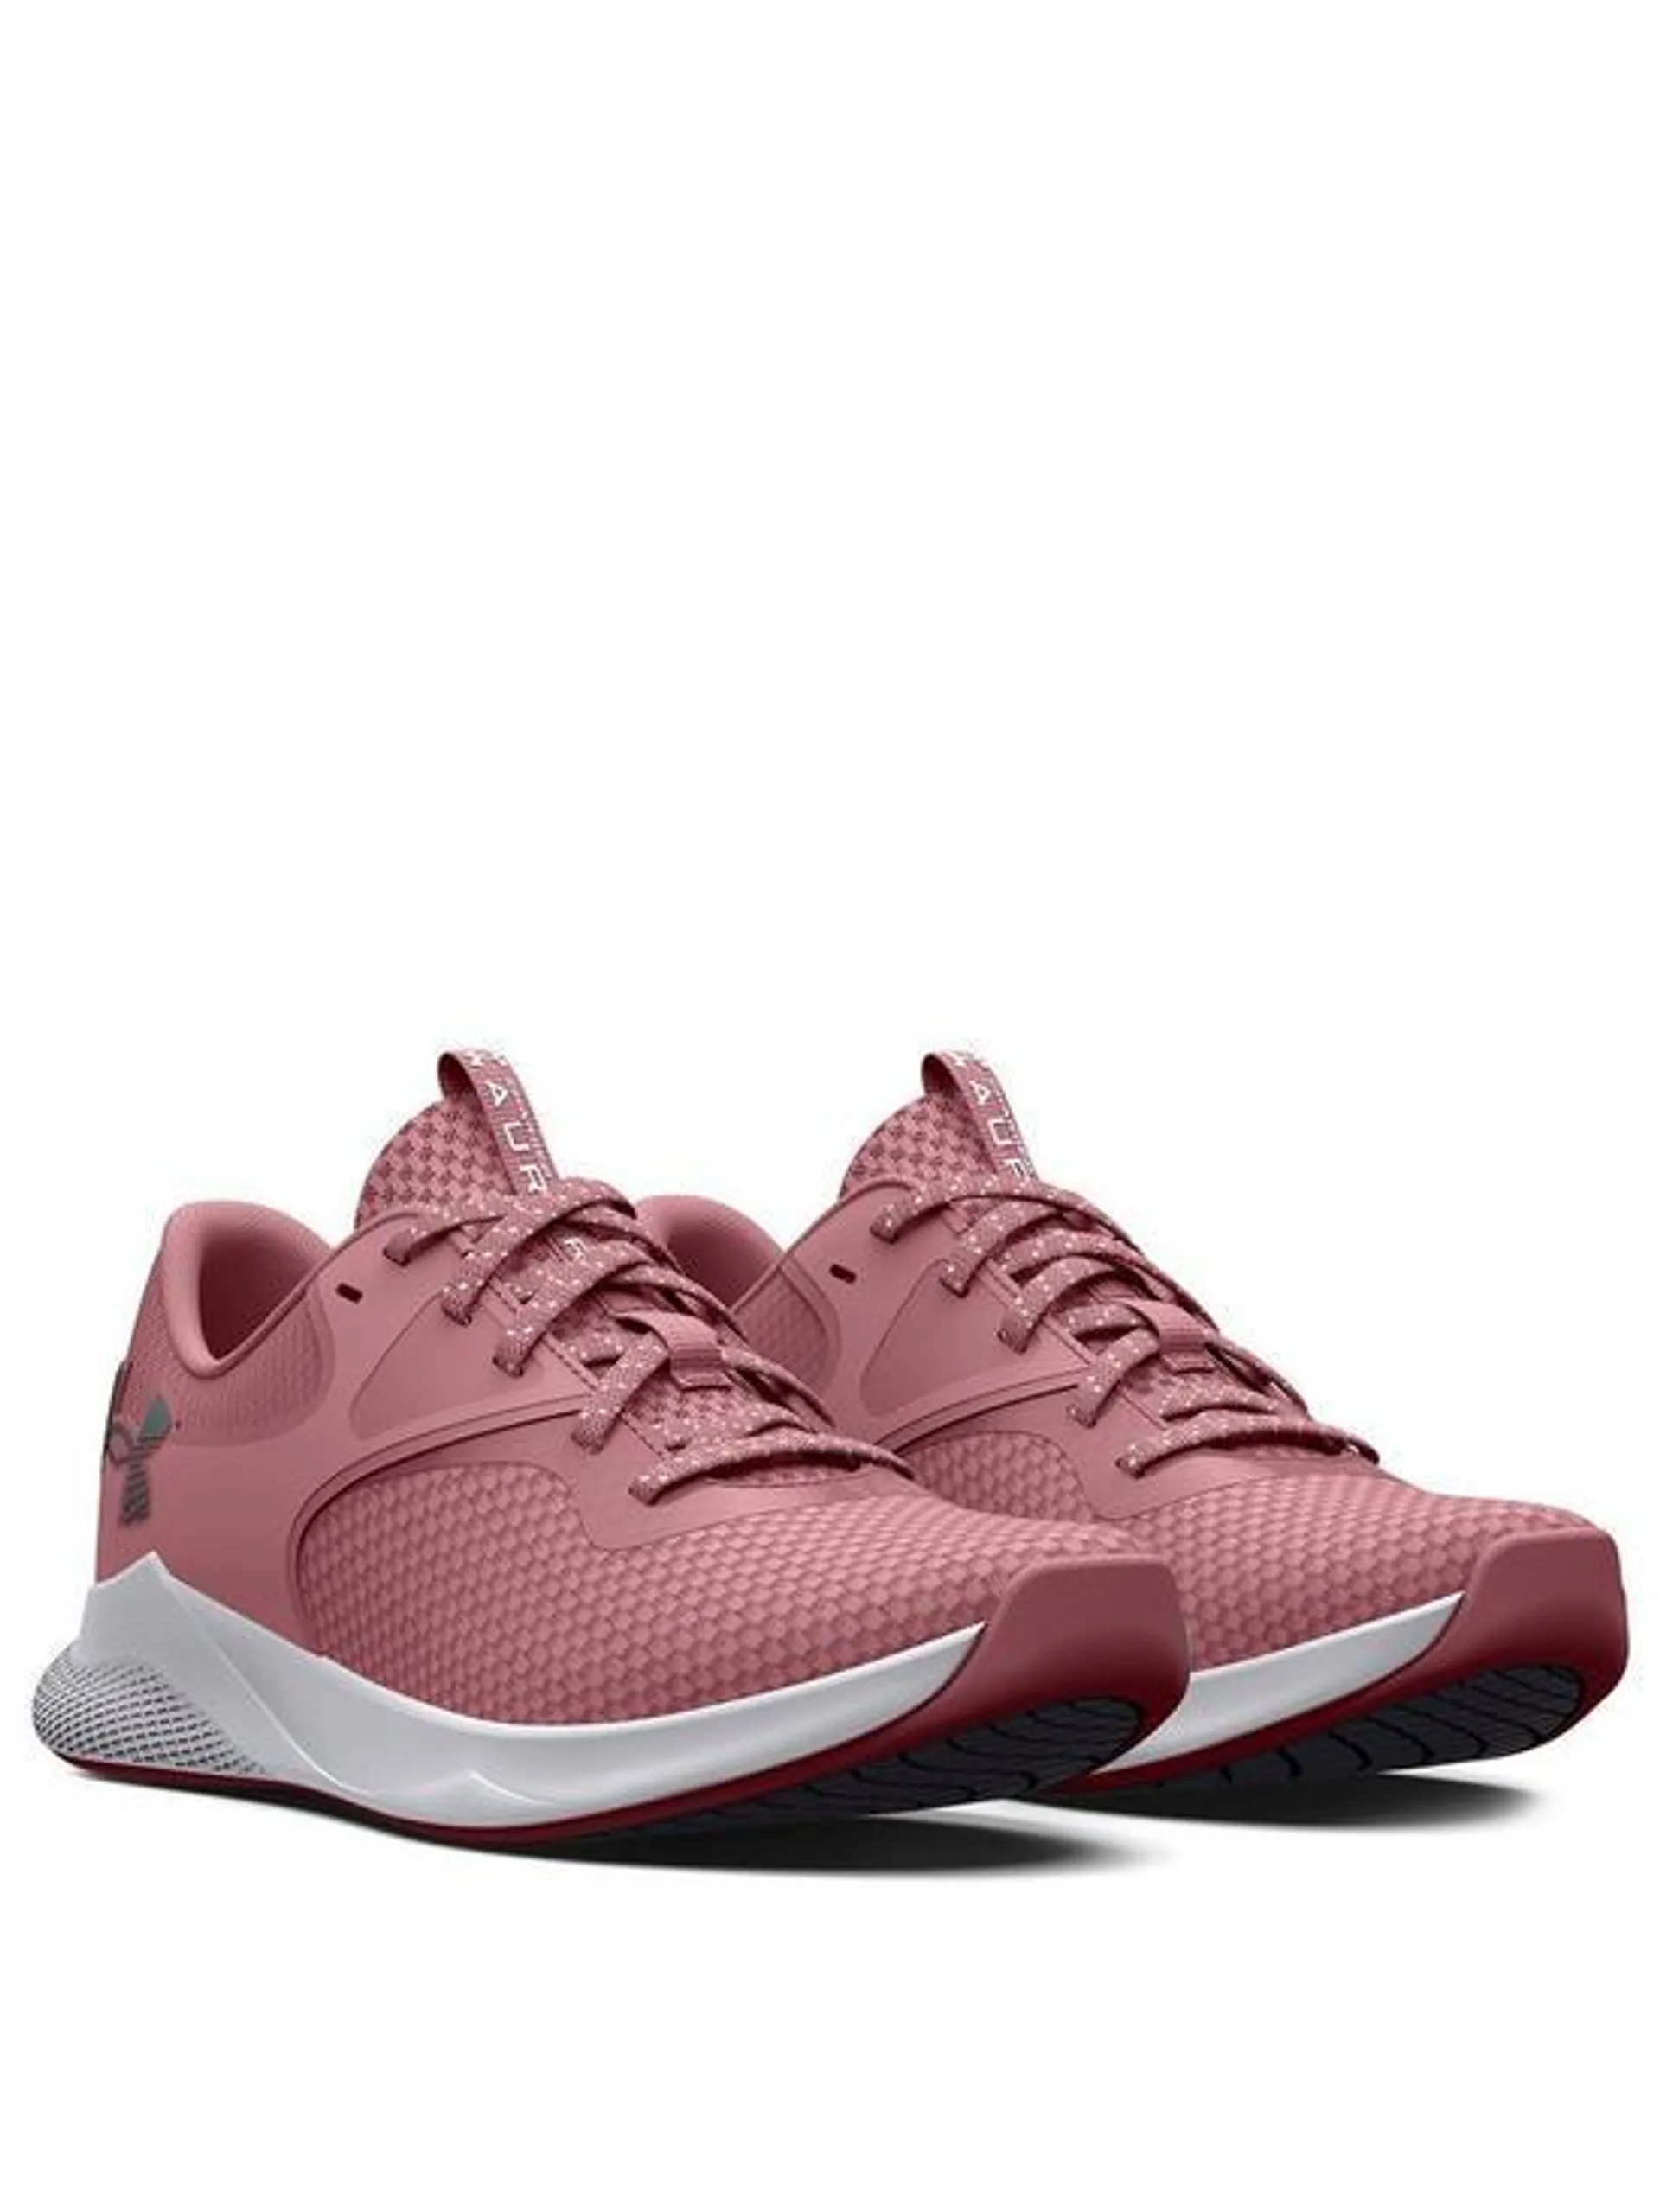 UNDER ARMOUR Charged Aurora 2 - Pink/White